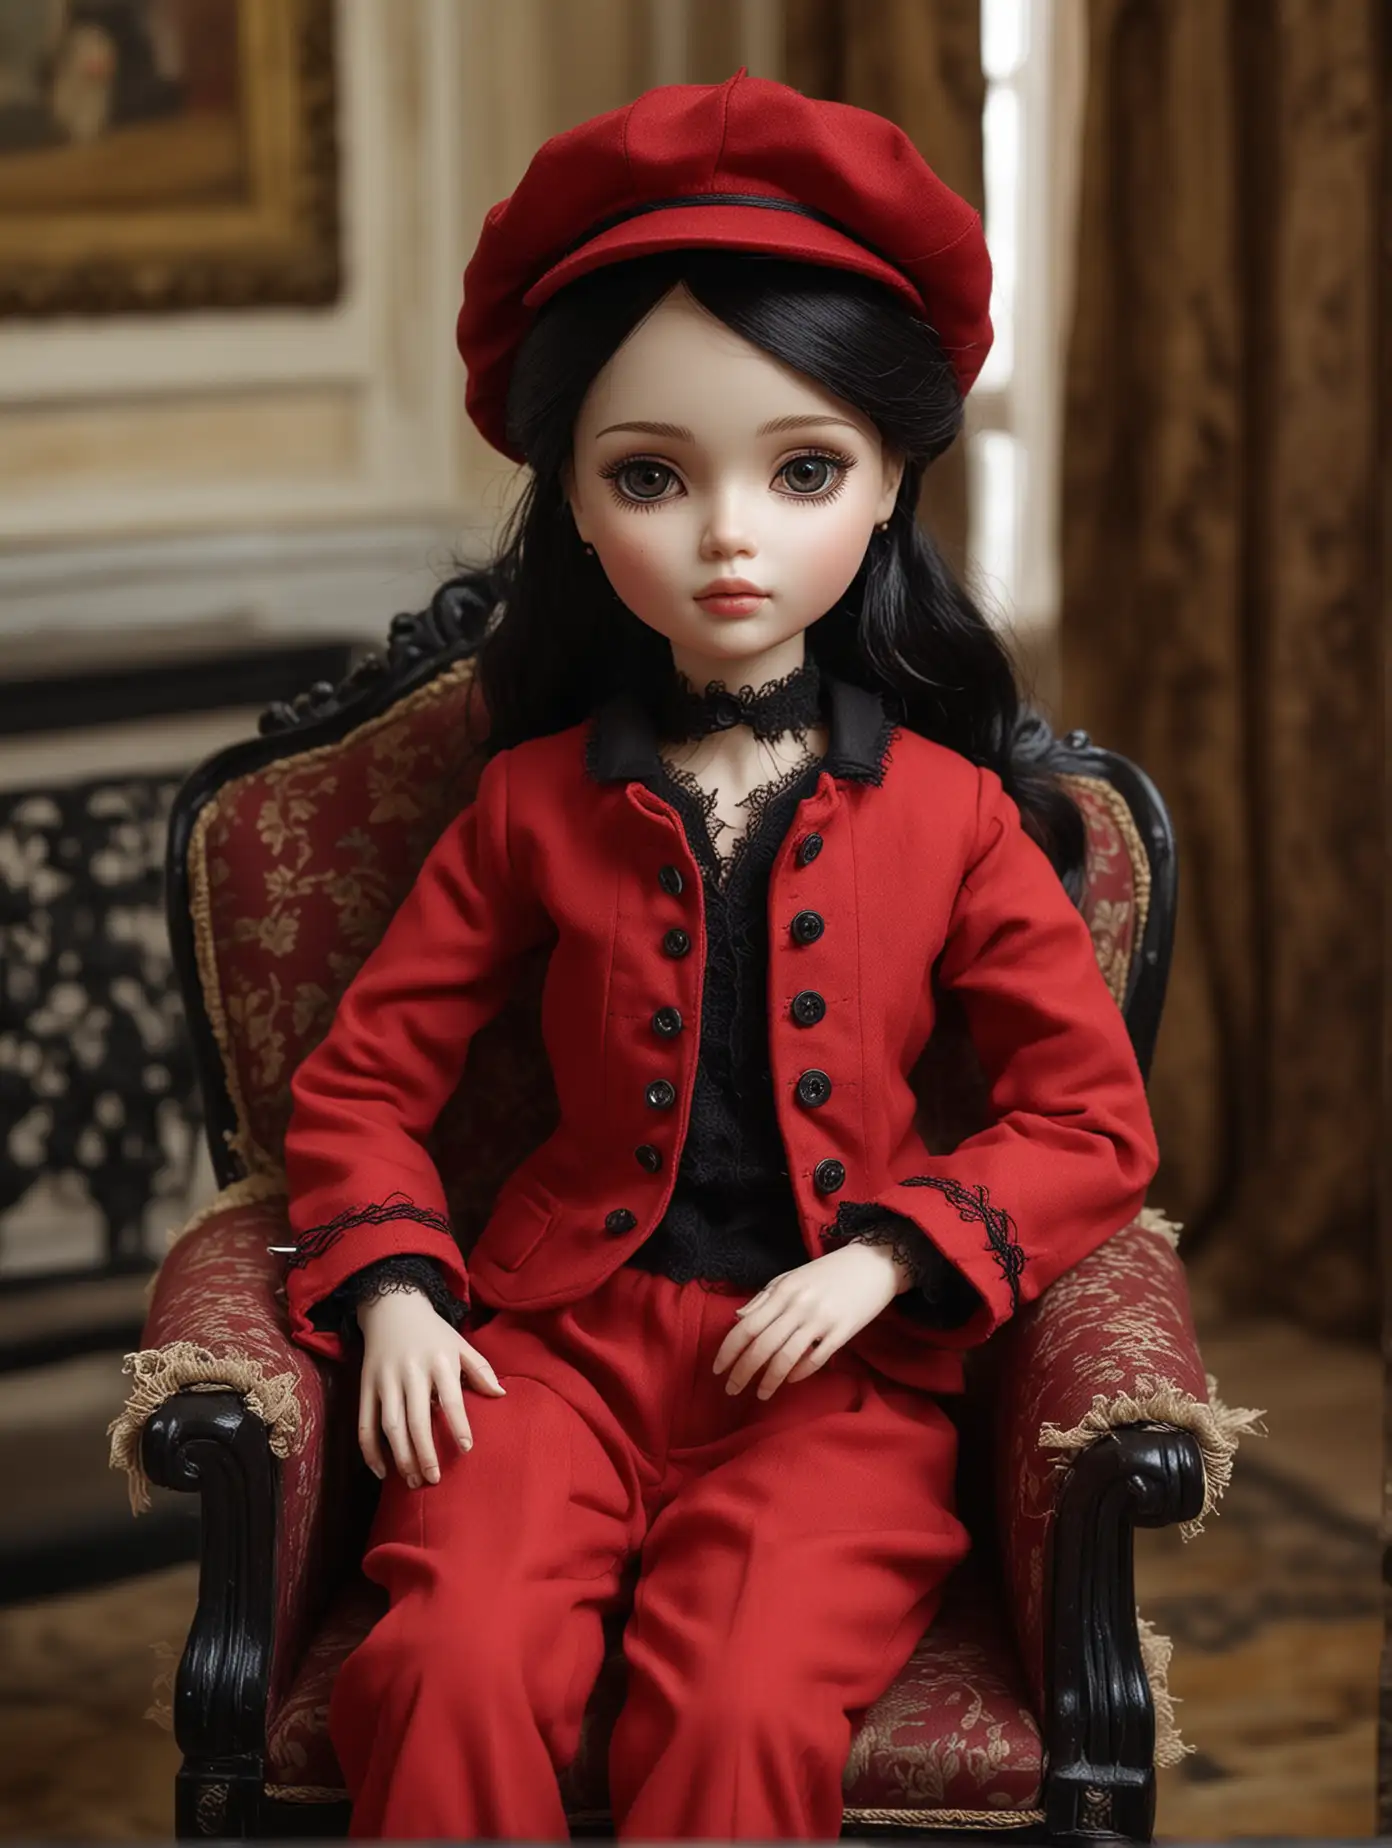 Elegant Doll with Red Hat Relaxing on Palace Chair